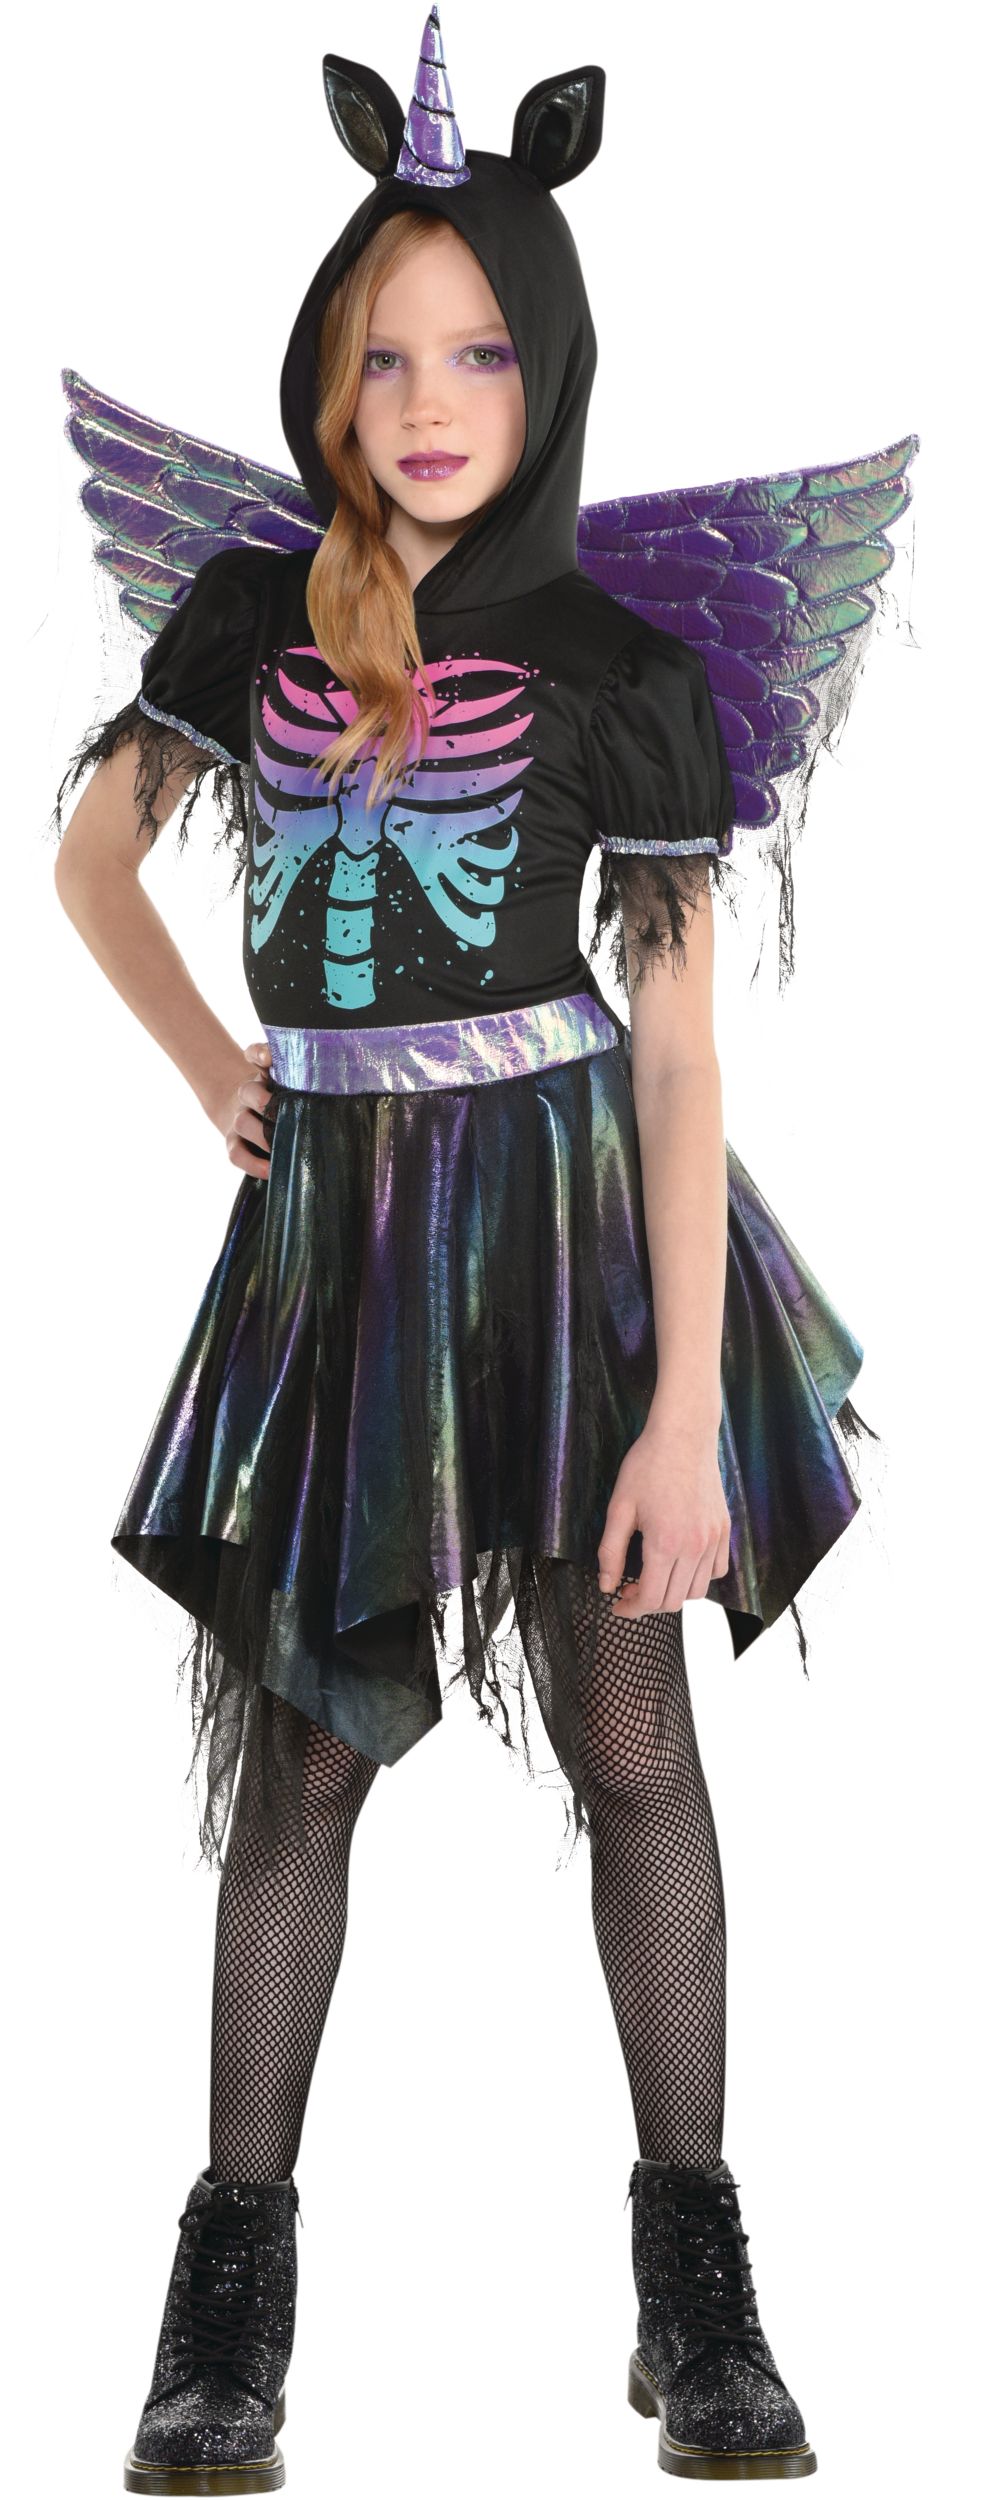 Compare prices for Costume Halloween Fille Licorne Déguisement across all  European  stores